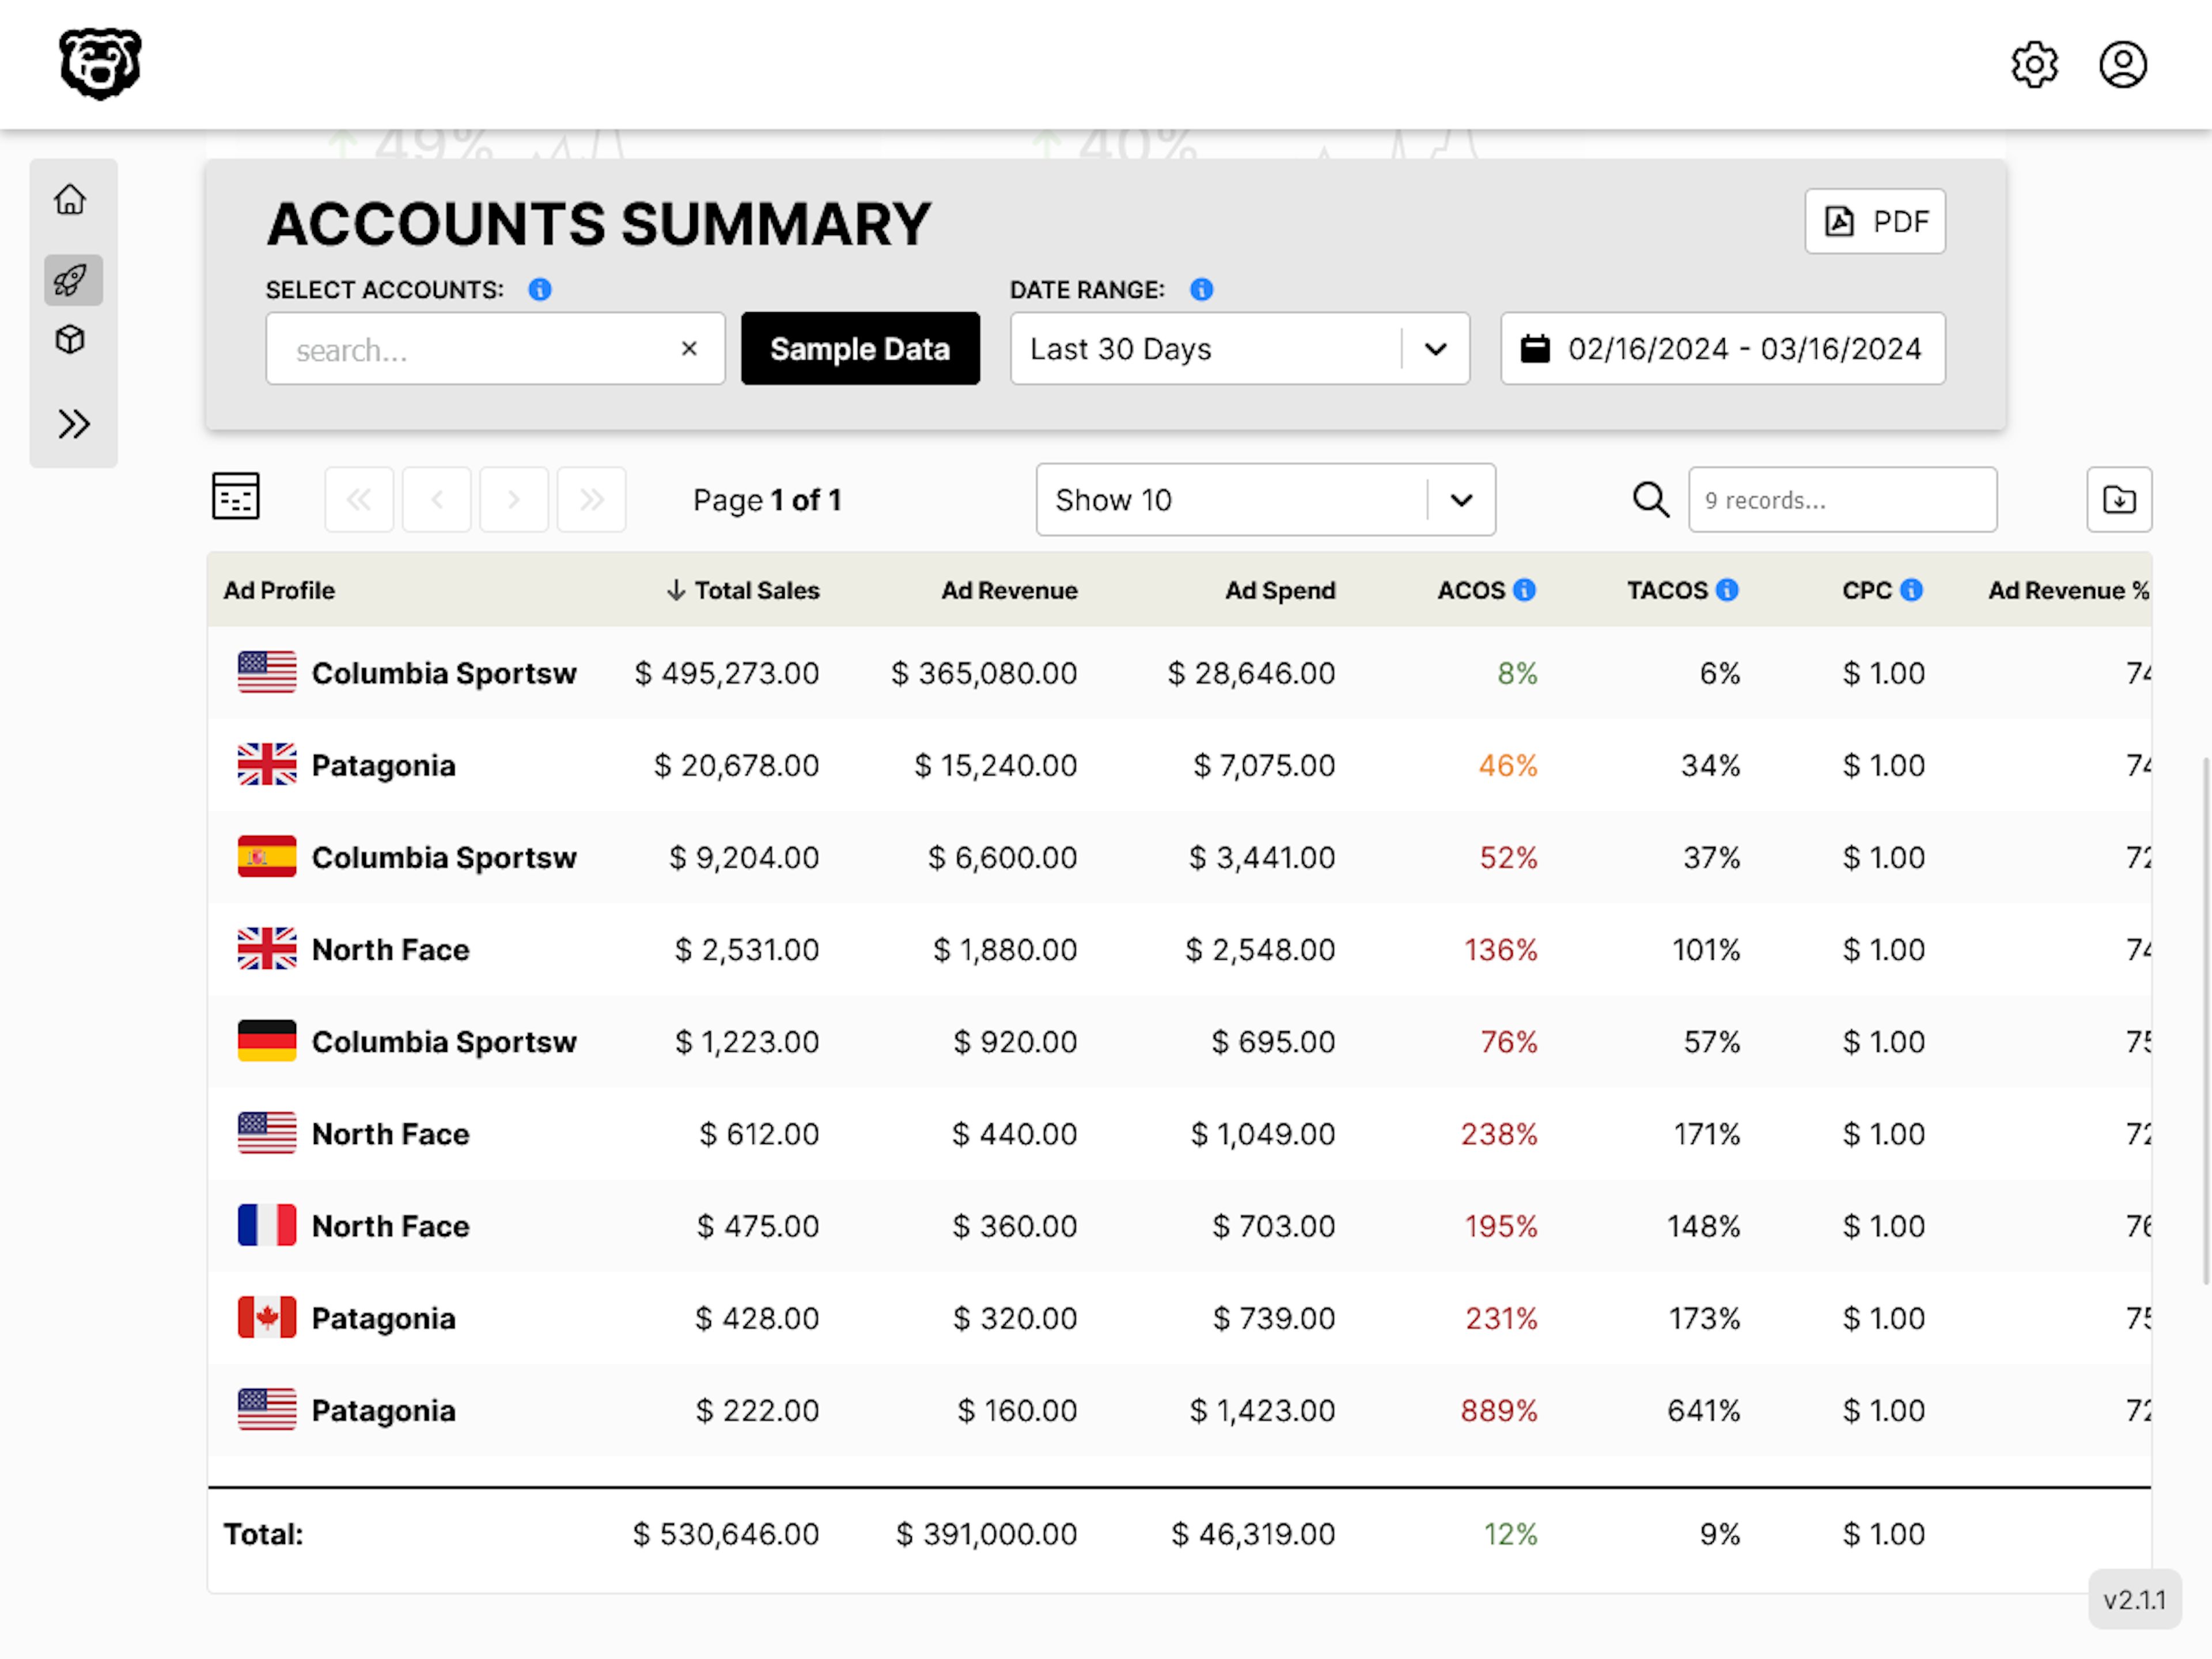 account summary report screenshot showing a table with multiple advertising accounts with TACoS, ACOS, Total Sales and other metrics.